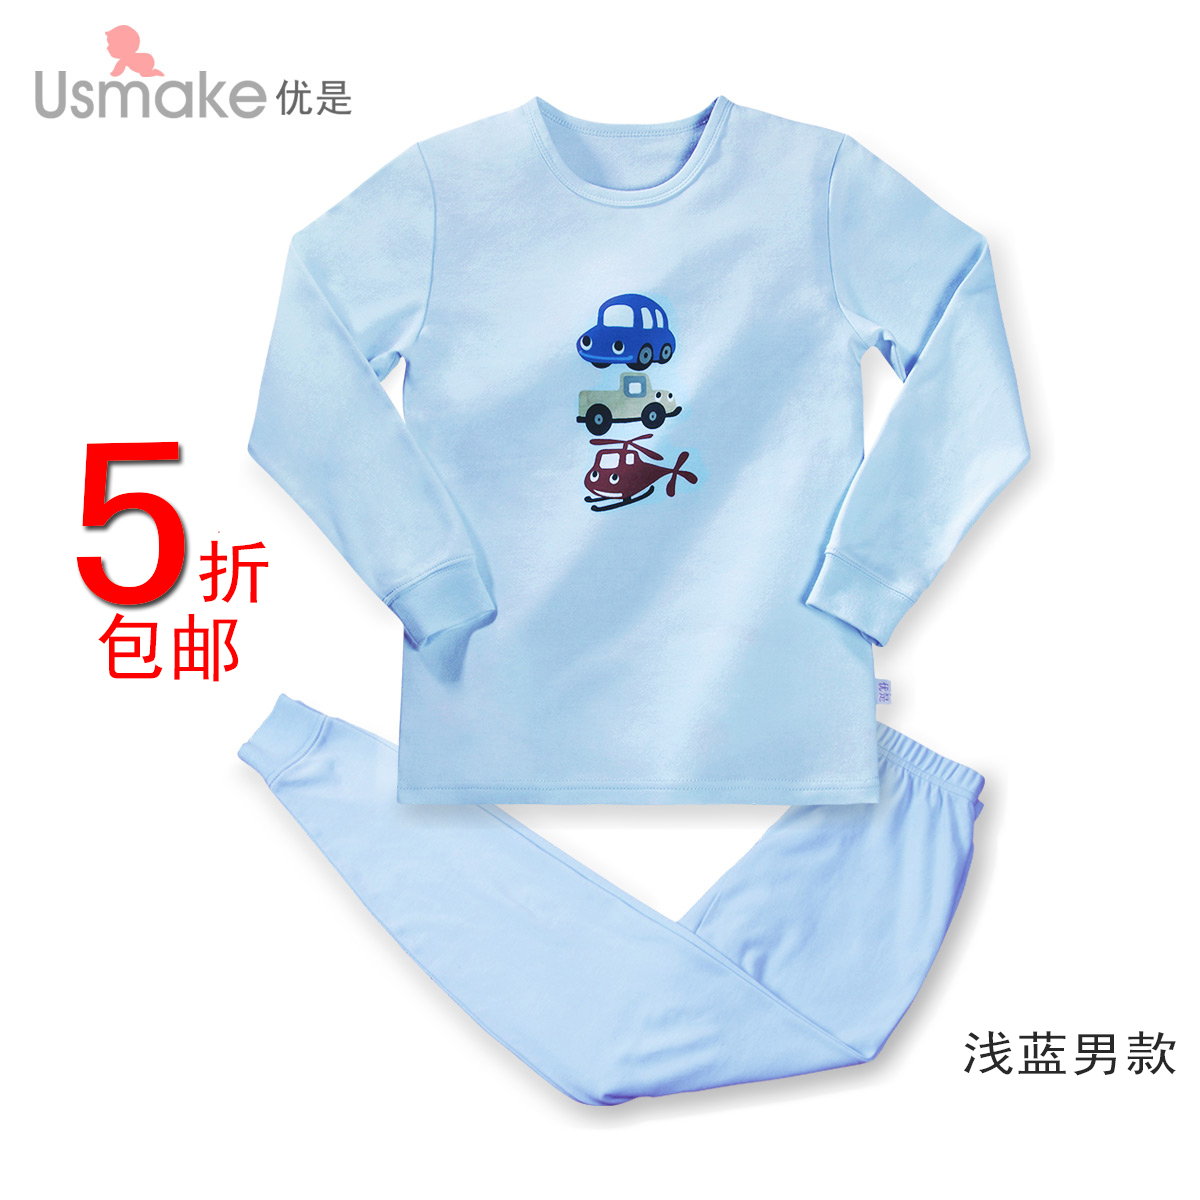 Superior child underwear set male child female child thermal long johns knitted 100% cotton 2 - 9